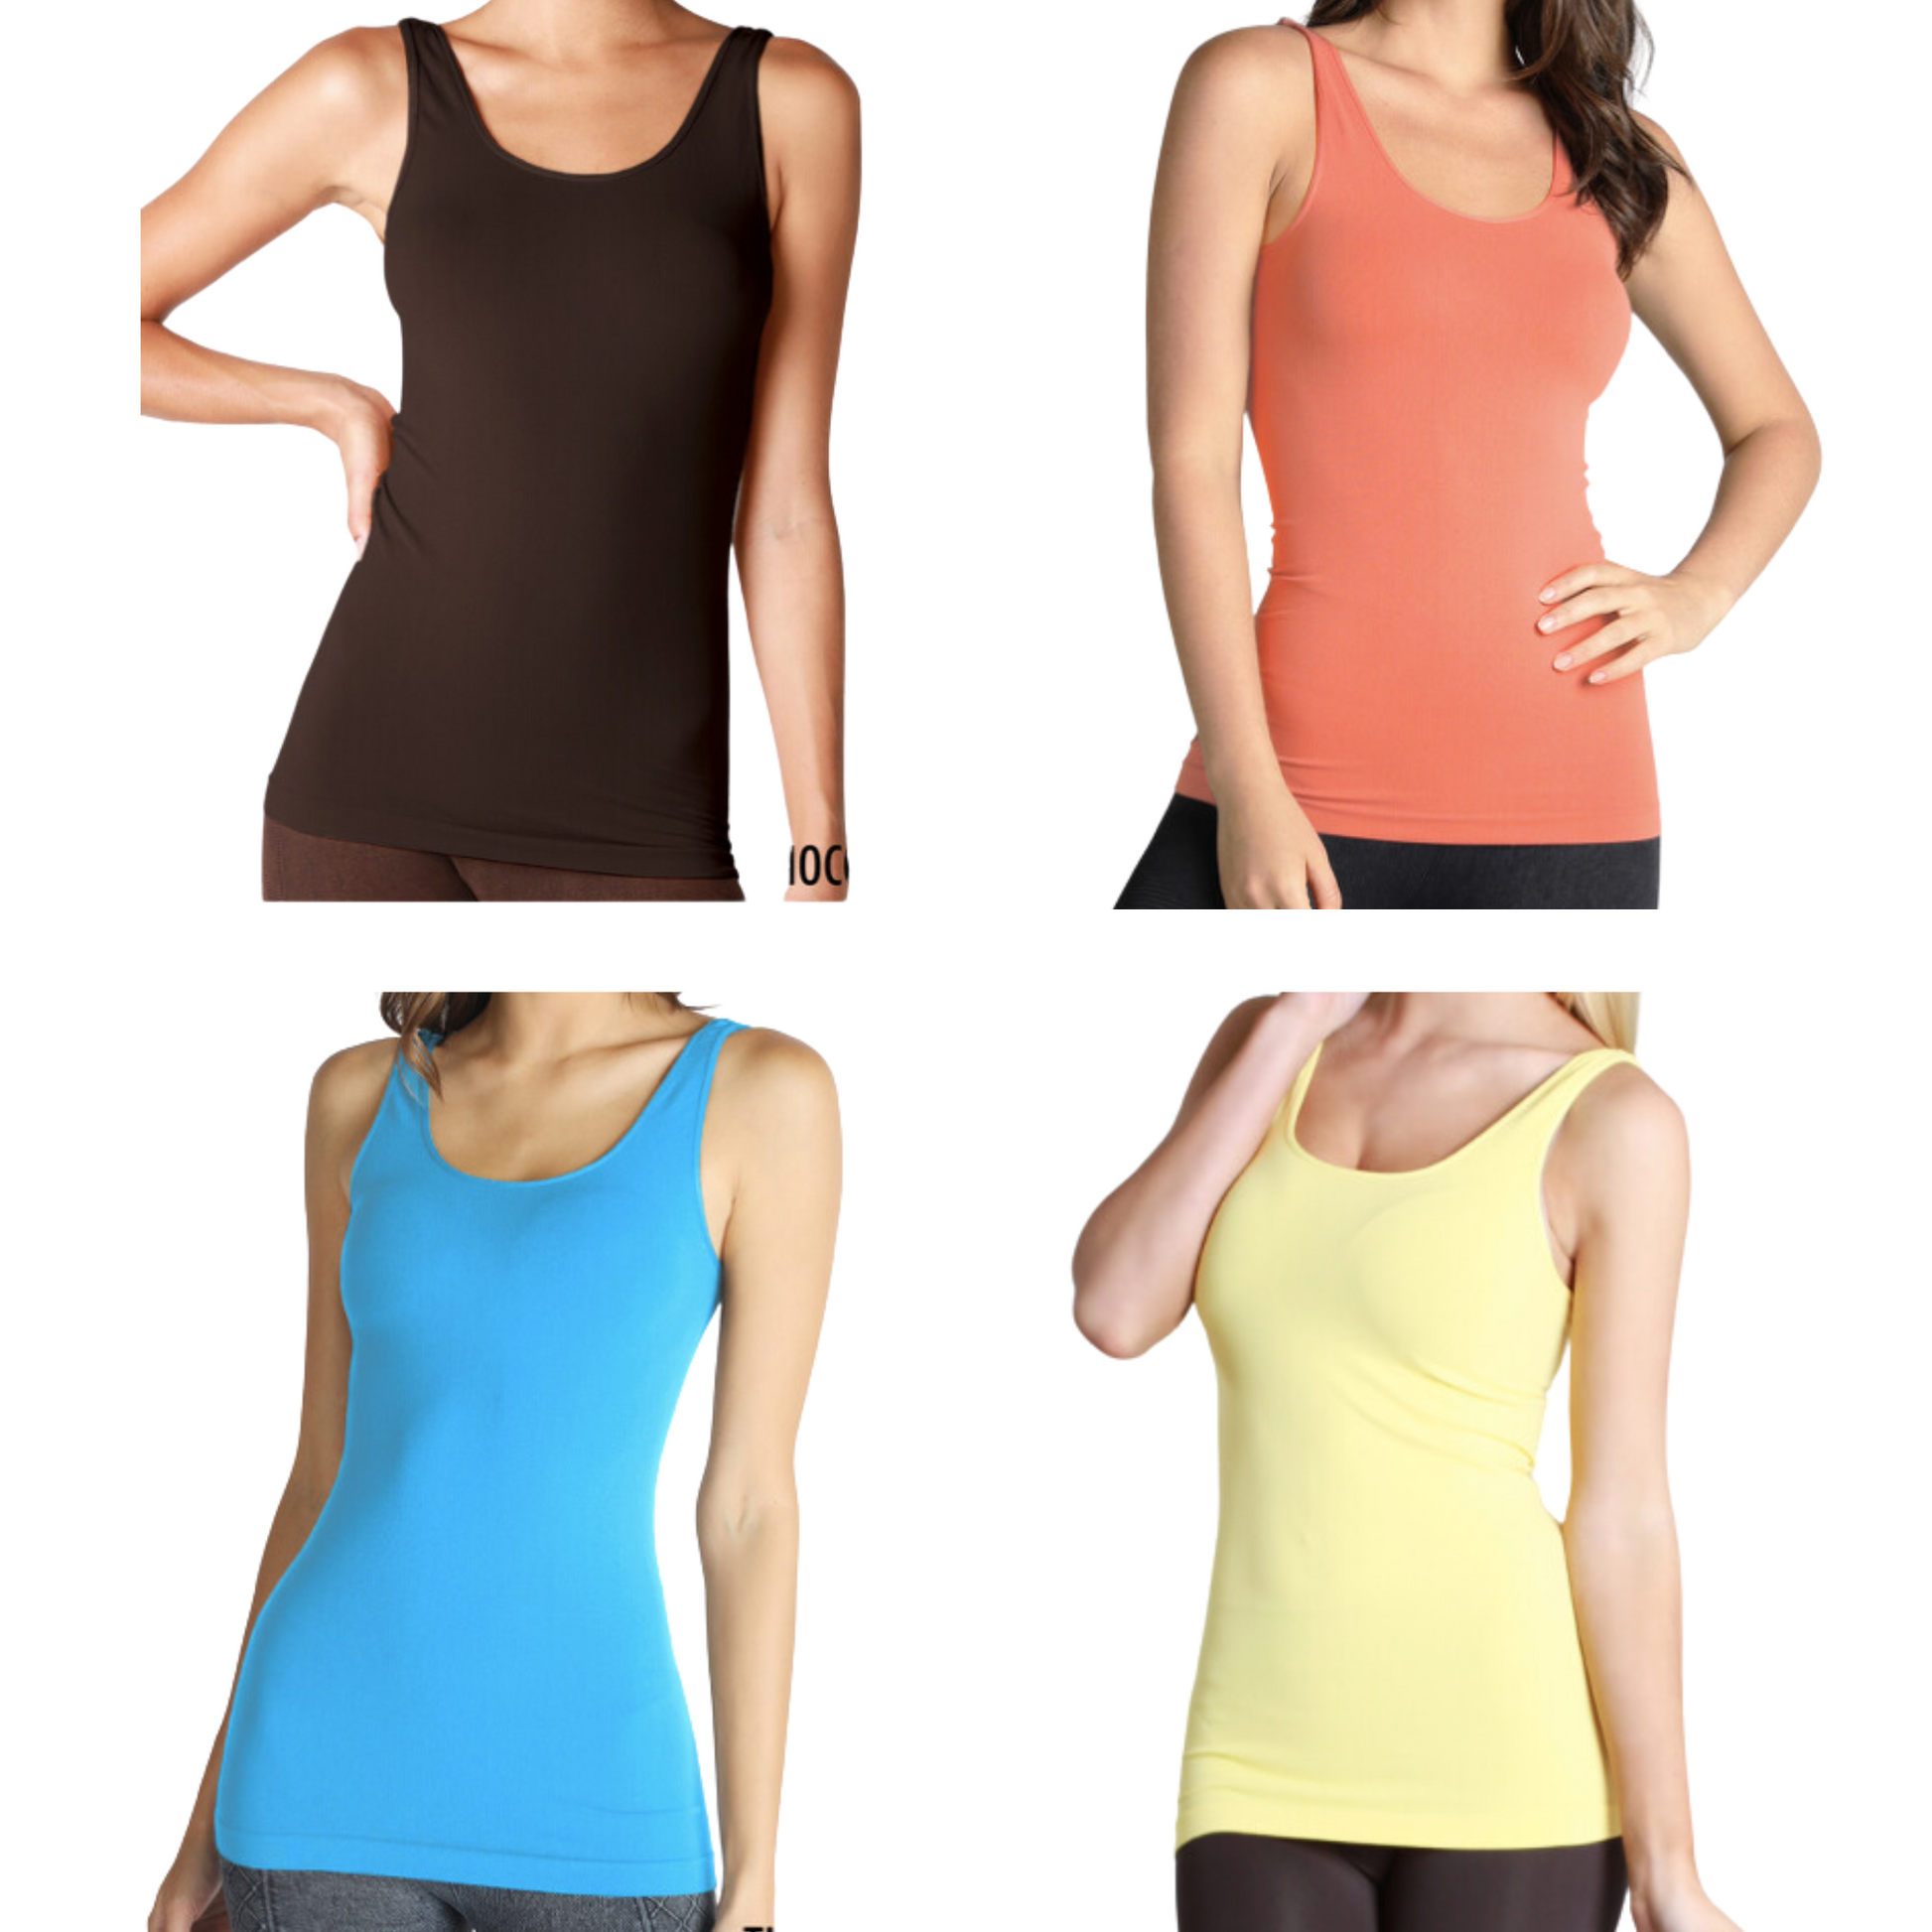 Our Tanks feature a butter soft texture that forms a flattering fit for any body type. Choose from a variety of colors to find the best look for you. Our Tanks are designed to keep you feeling comfortable and looking stylish.